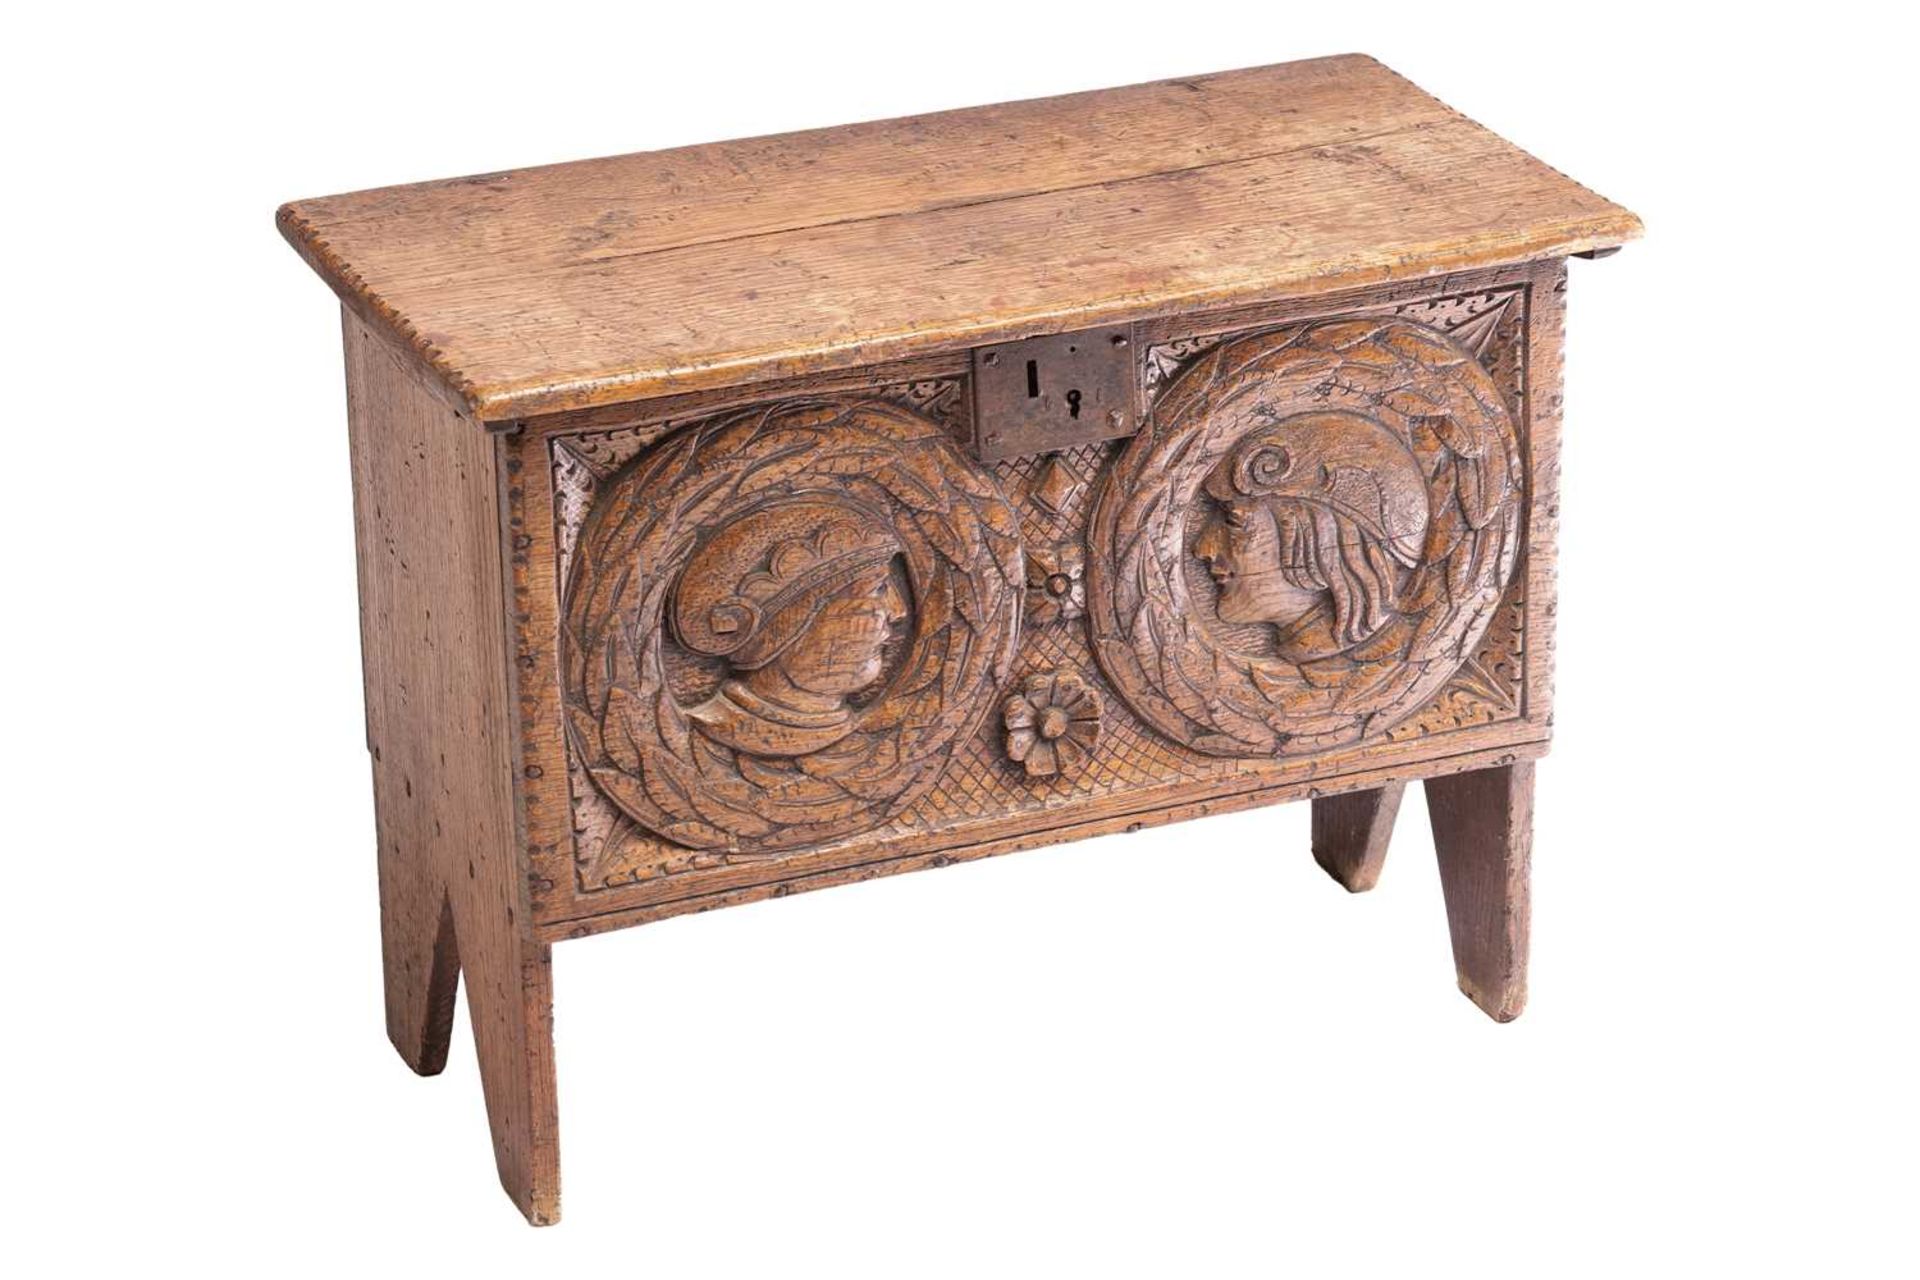 A small 17th-century style oak six-plank coffer, the frieze carved with Romanesque portrait roundels